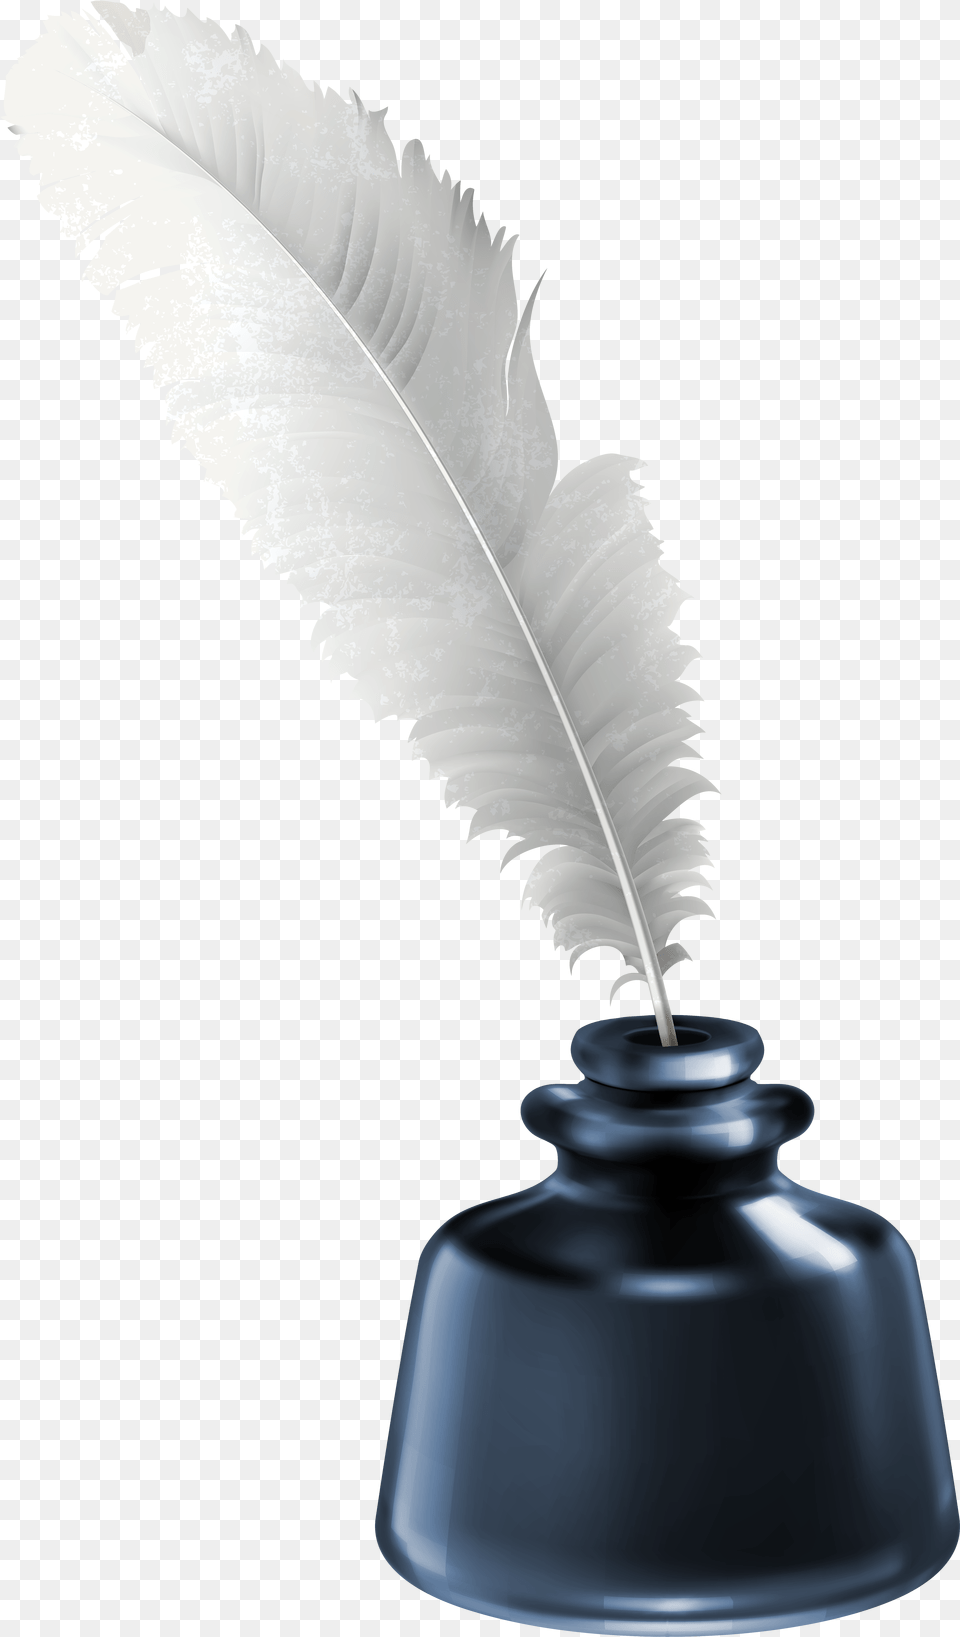 Feathers Clipart Ink Quill And Ink Transparent Background, Bottle, Ink Bottle, Smoke Pipe Free Png